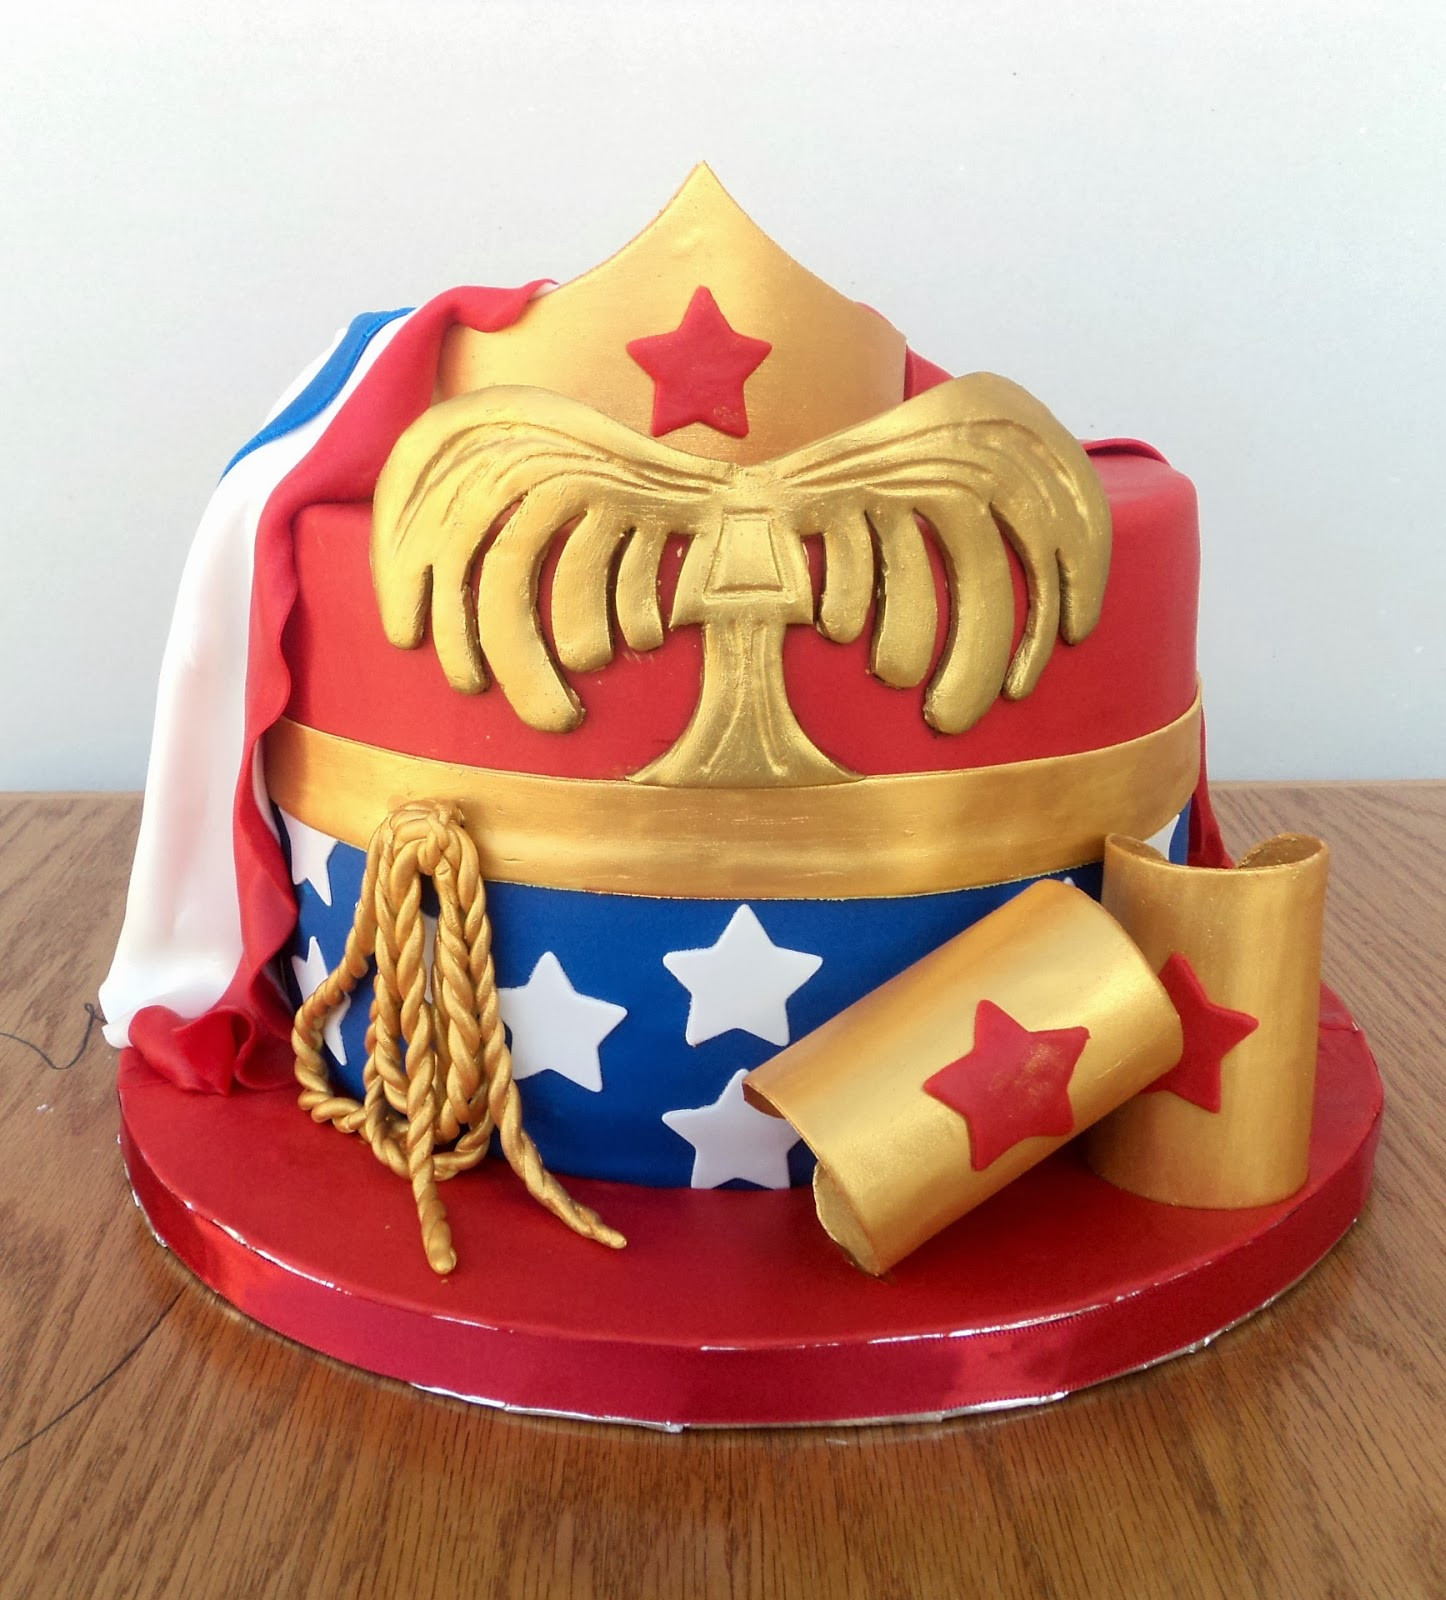 Woman Birthday Cake
 Delectable Cakes Wonder Woman with Cape Birthday Cake